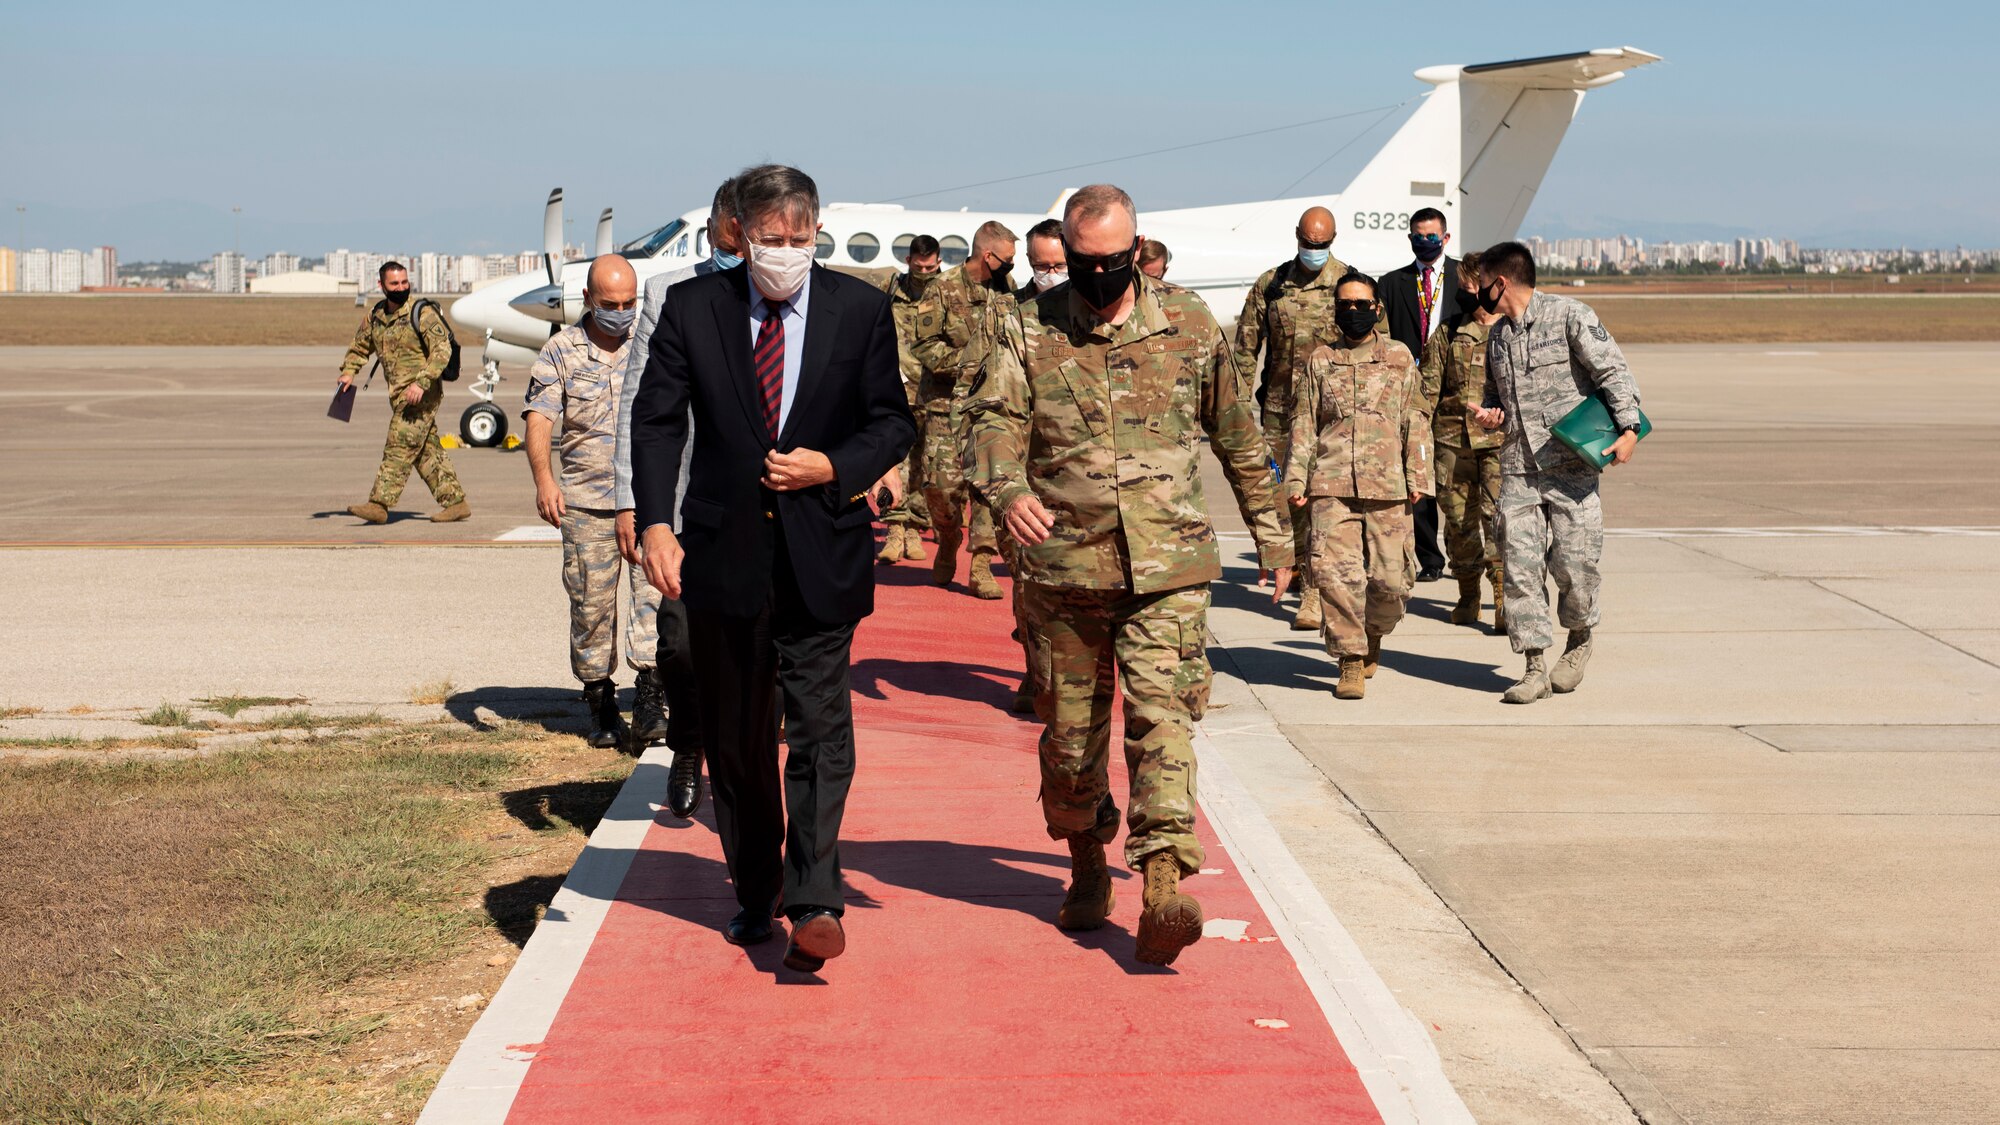 Col. John Creel, 39th Air Base Wing commander, and U.S. Ambassador to Turkey David Satterfield walk down the flight line "red carpet" with retinue in-tow behind them.